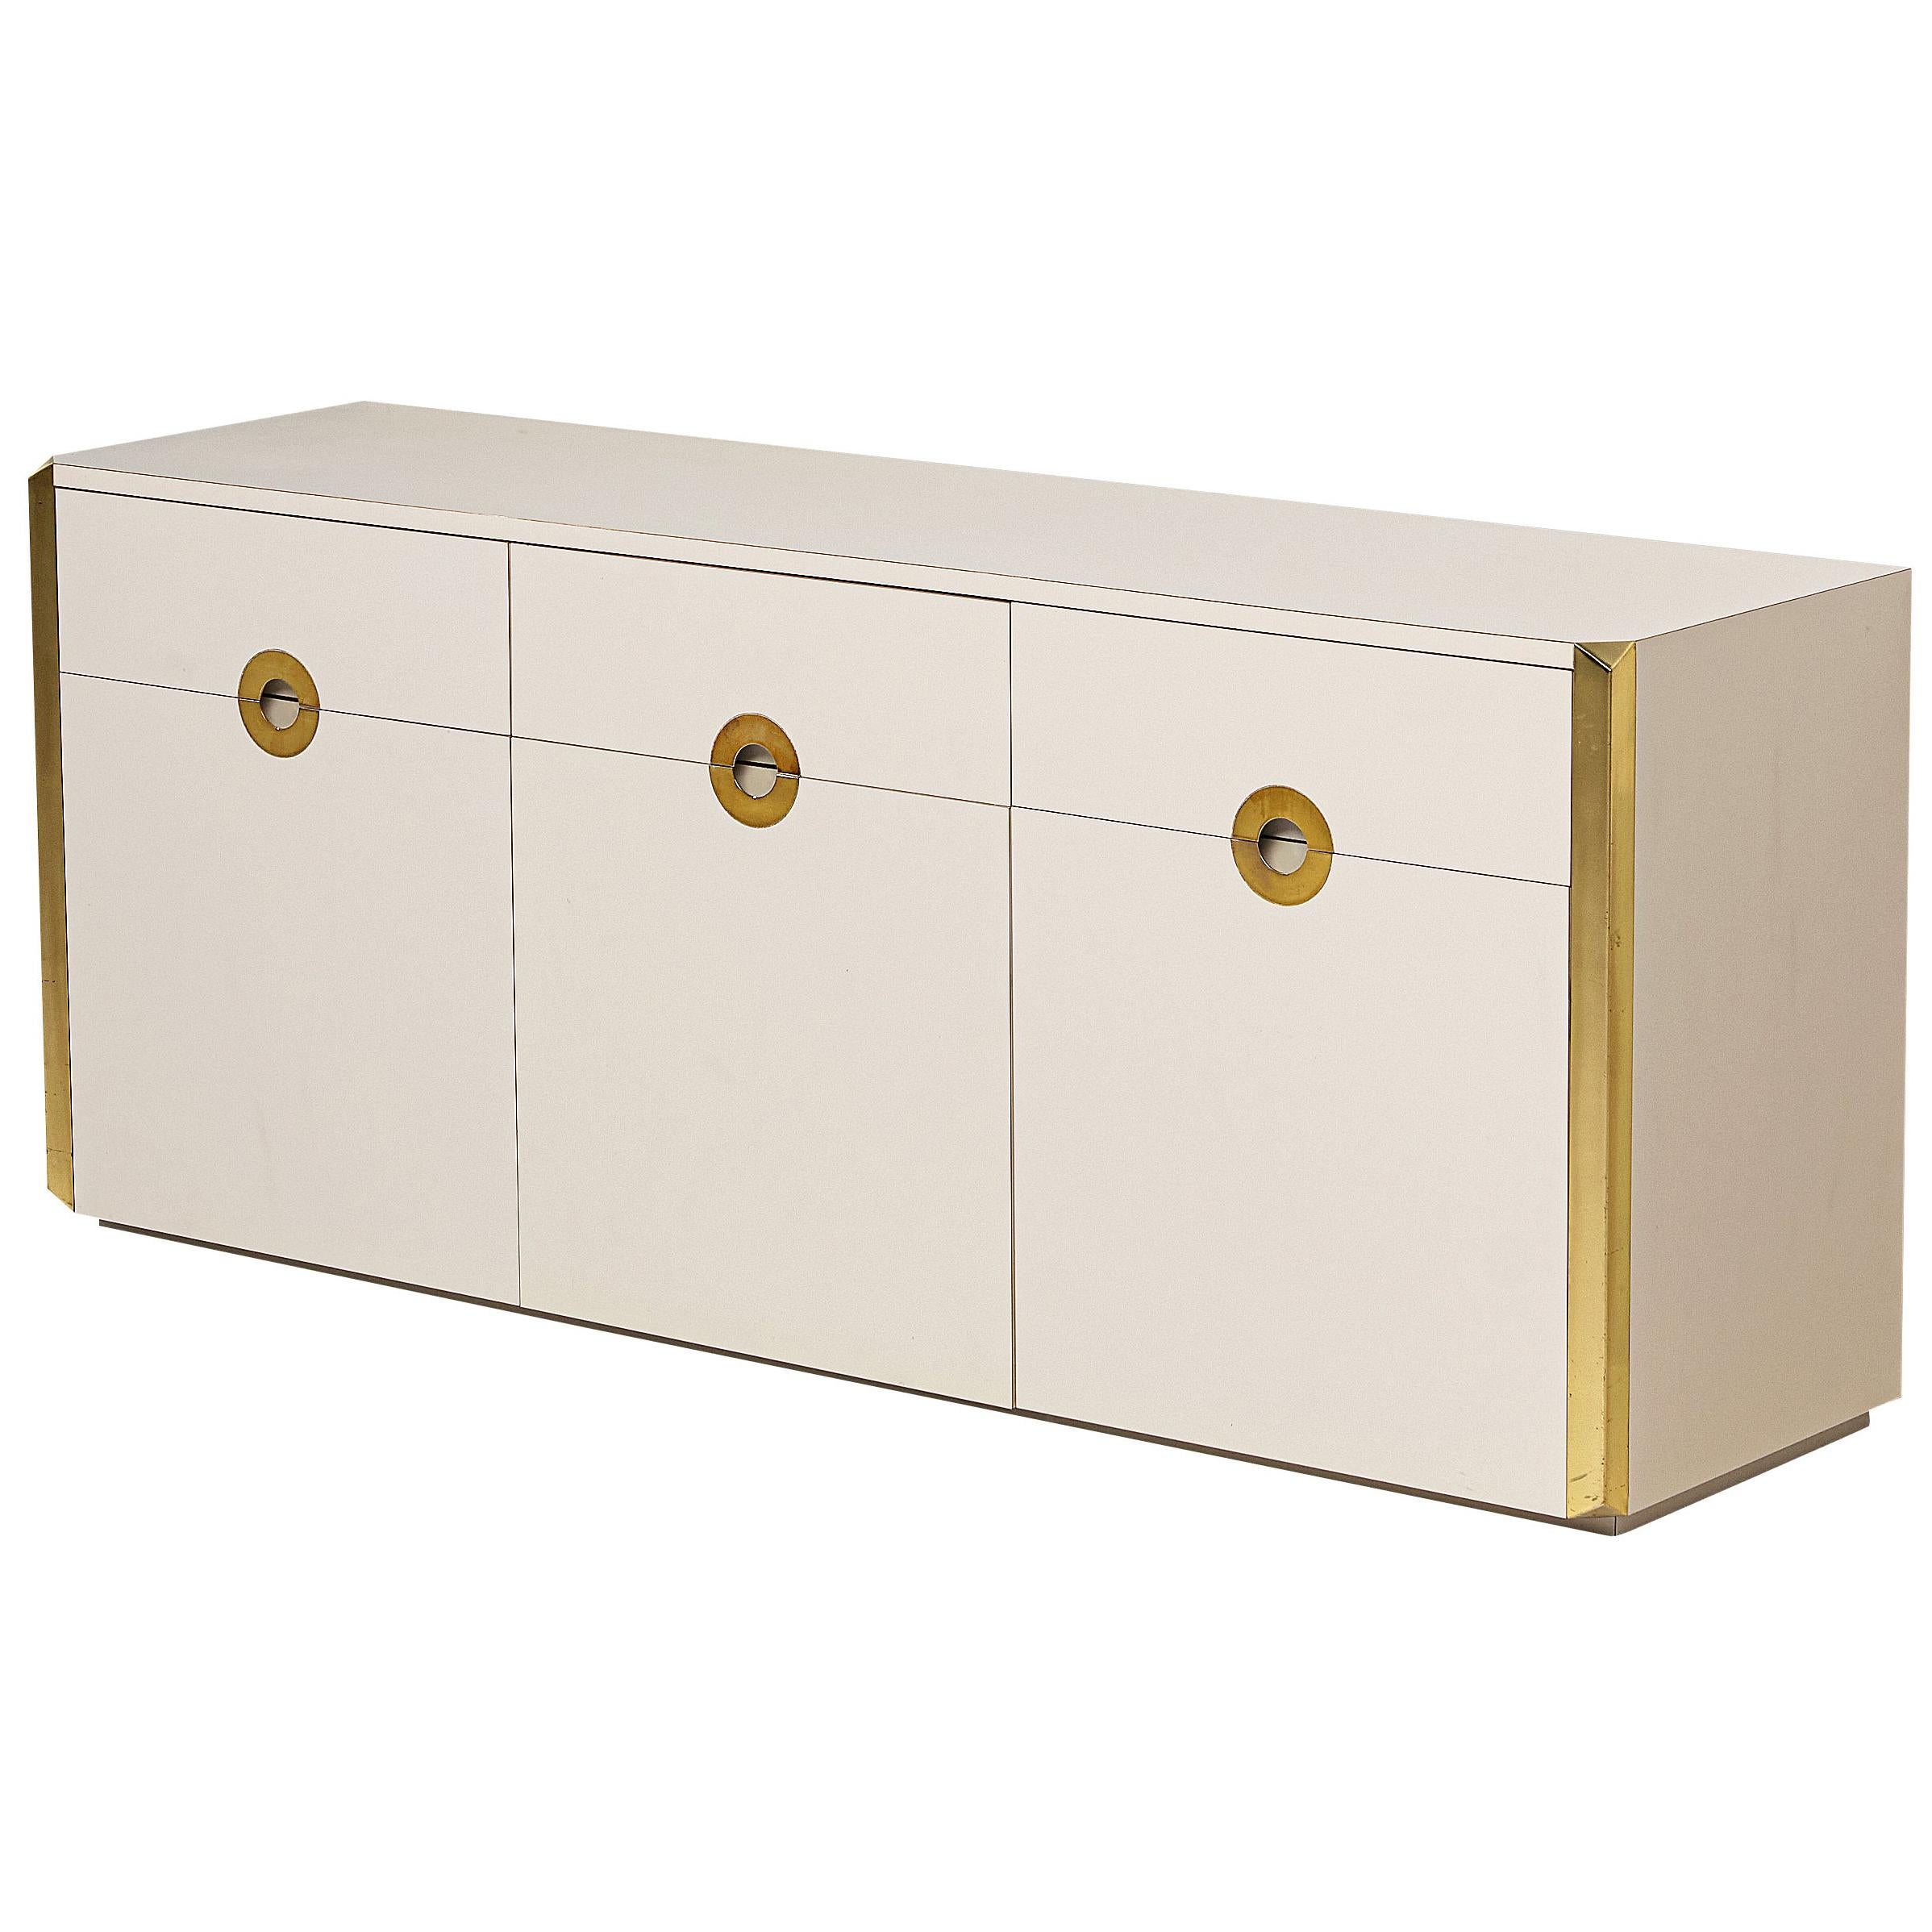 Three-Door Sideboard in Style of Willy Rizzo